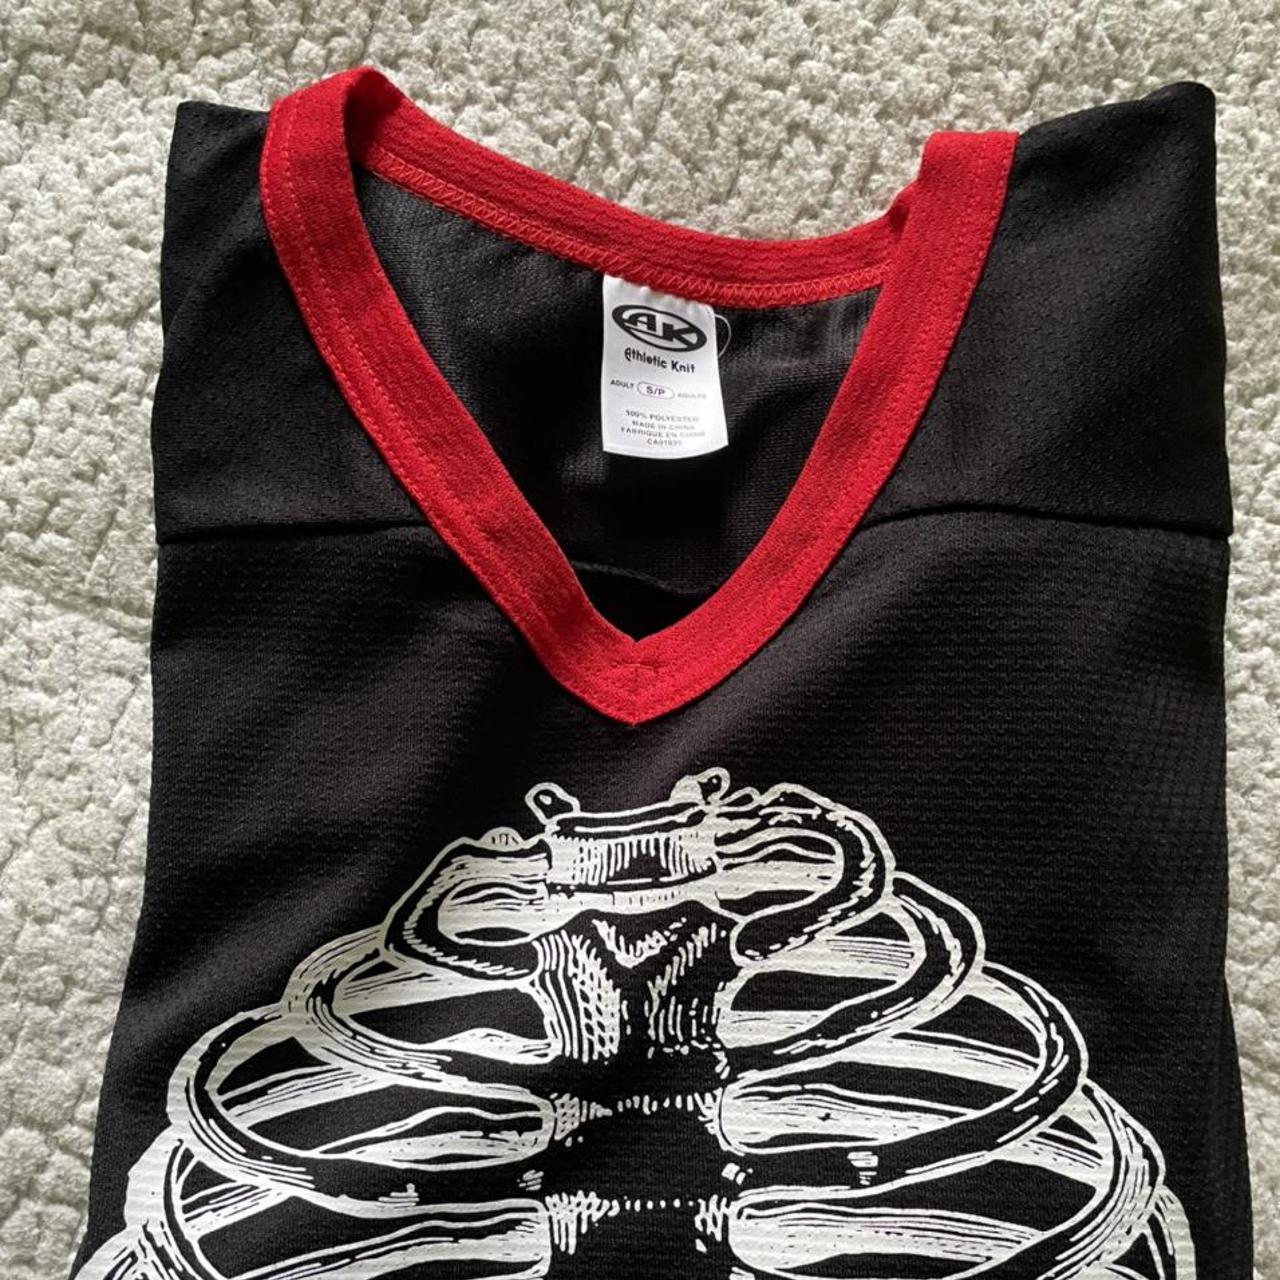 Product Image 4 - pleasures hockey jersey
size: small, fits